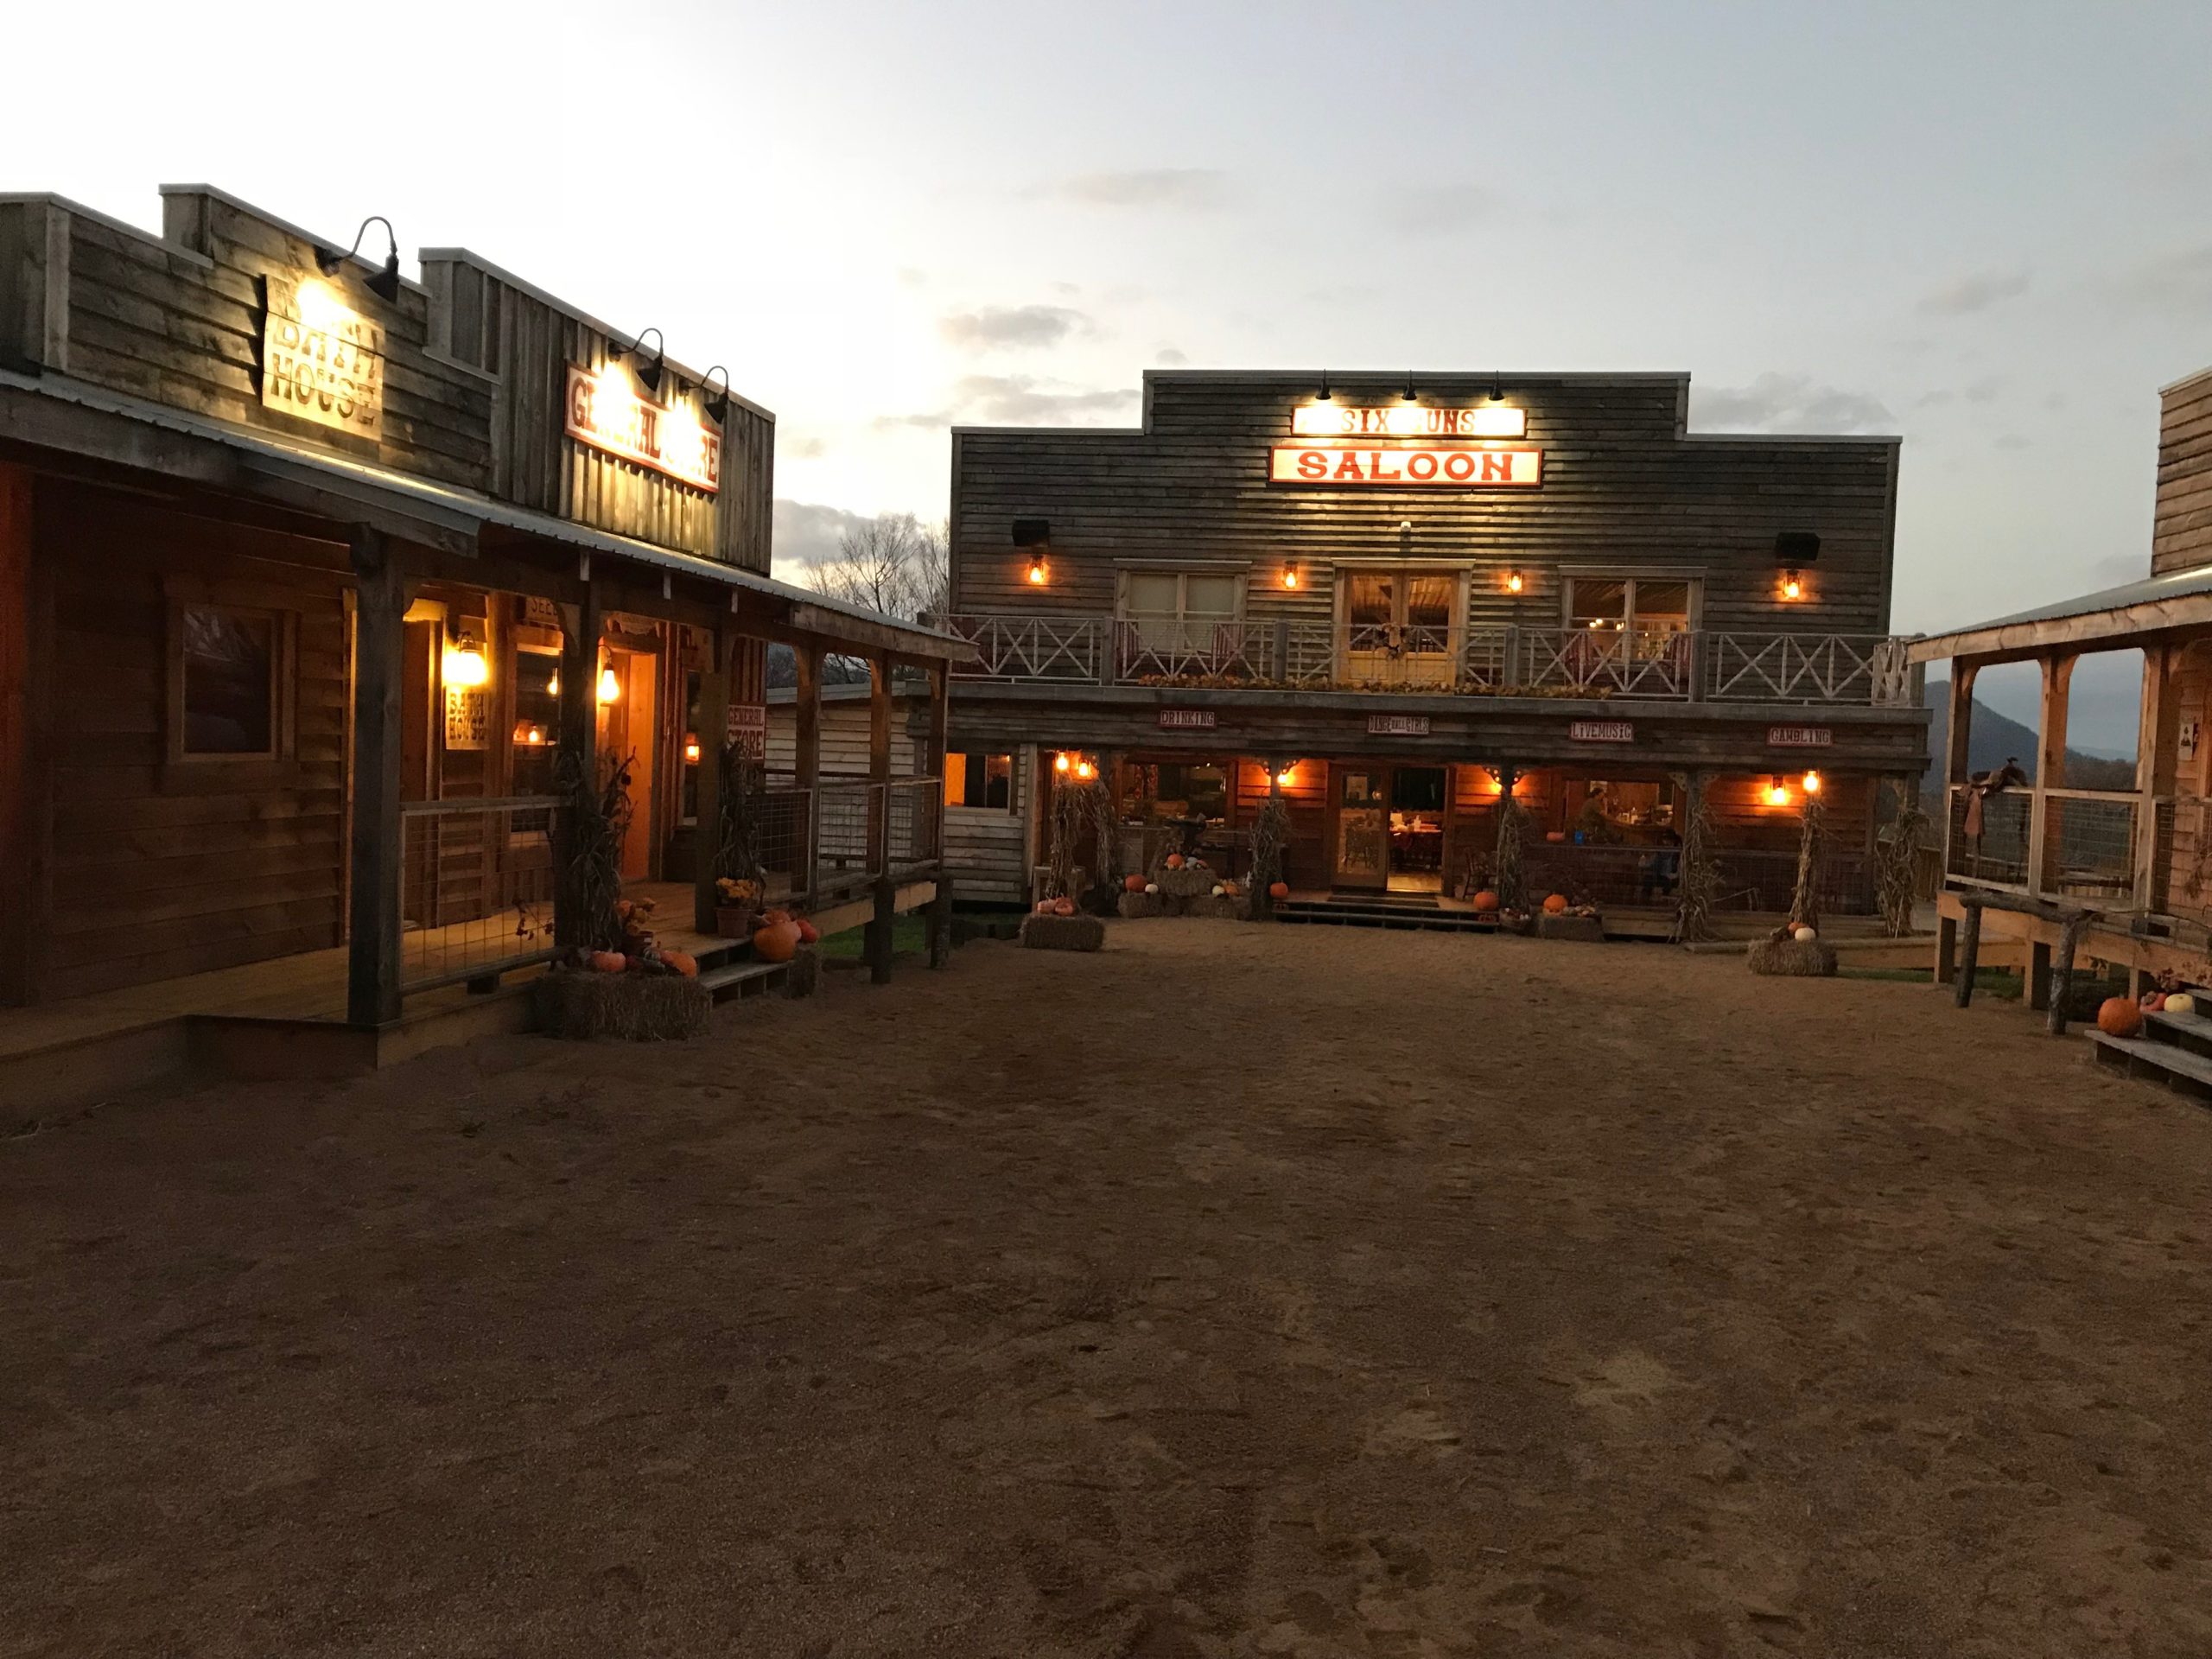 wild wild west, old west town, music venue, exclusive event, themed venue